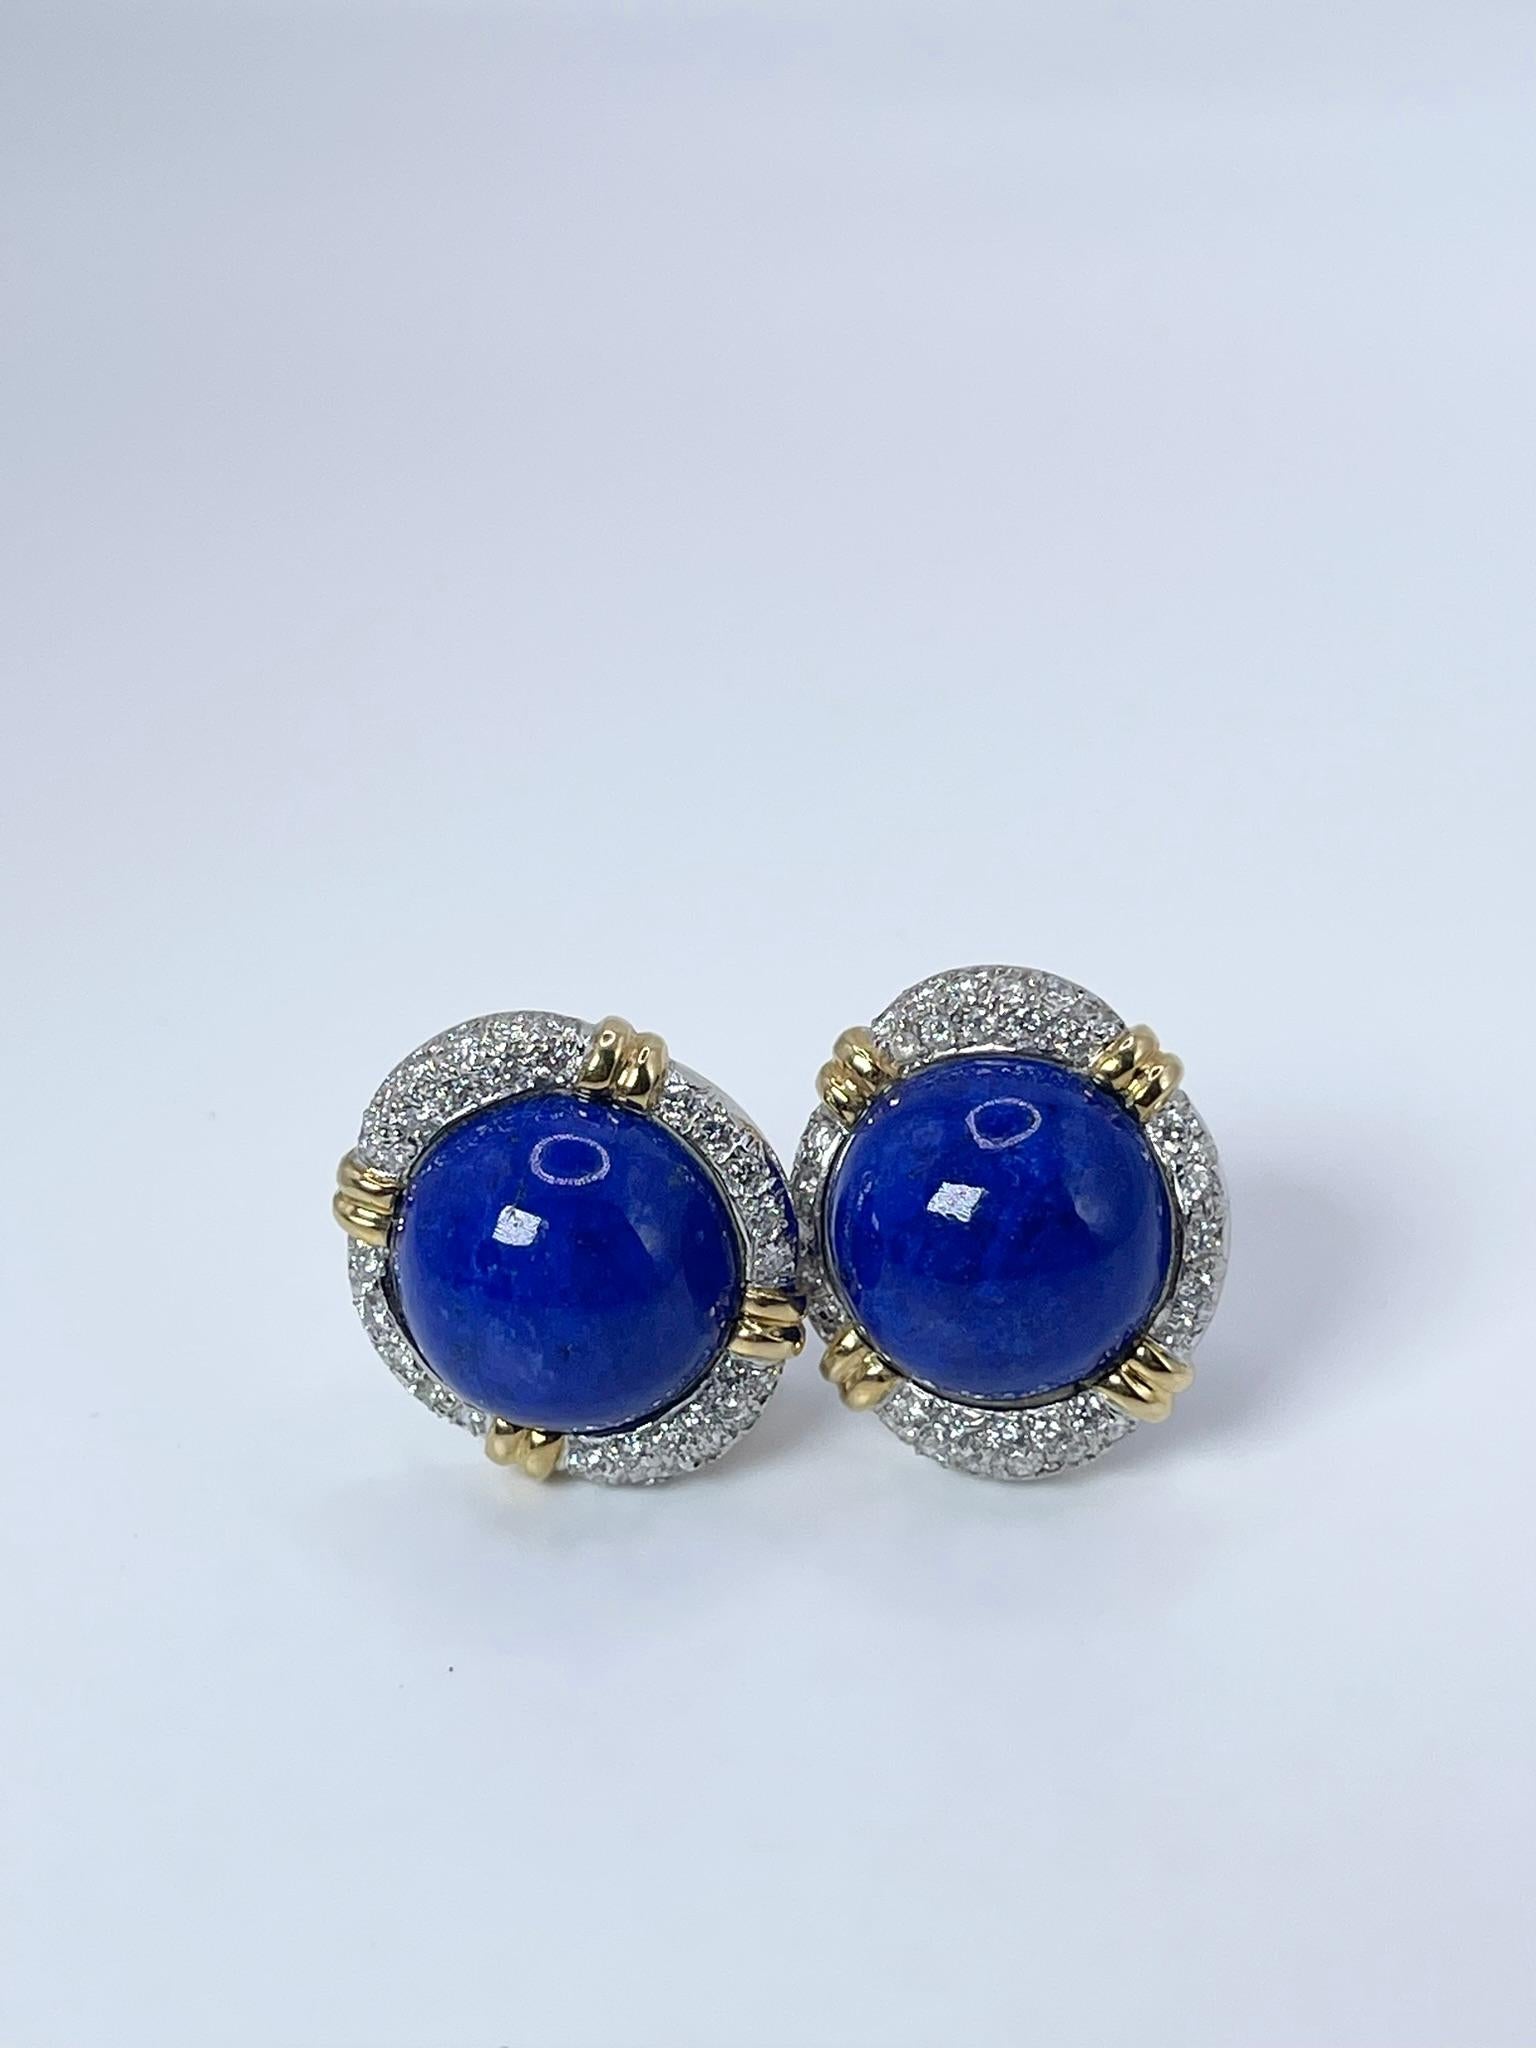 Rare find, vintage lapis lazulli earrings made with VS diamonds, very large earrings with omega backing made in 18KT gold. 

GRAM WEIGHT: 23.95gr
GOLD: 18KT white and yellow gold
SIZE: 23x22mm diameter

NATURAL DIAMOND(S)
Cut: Round Brilliant
Color: